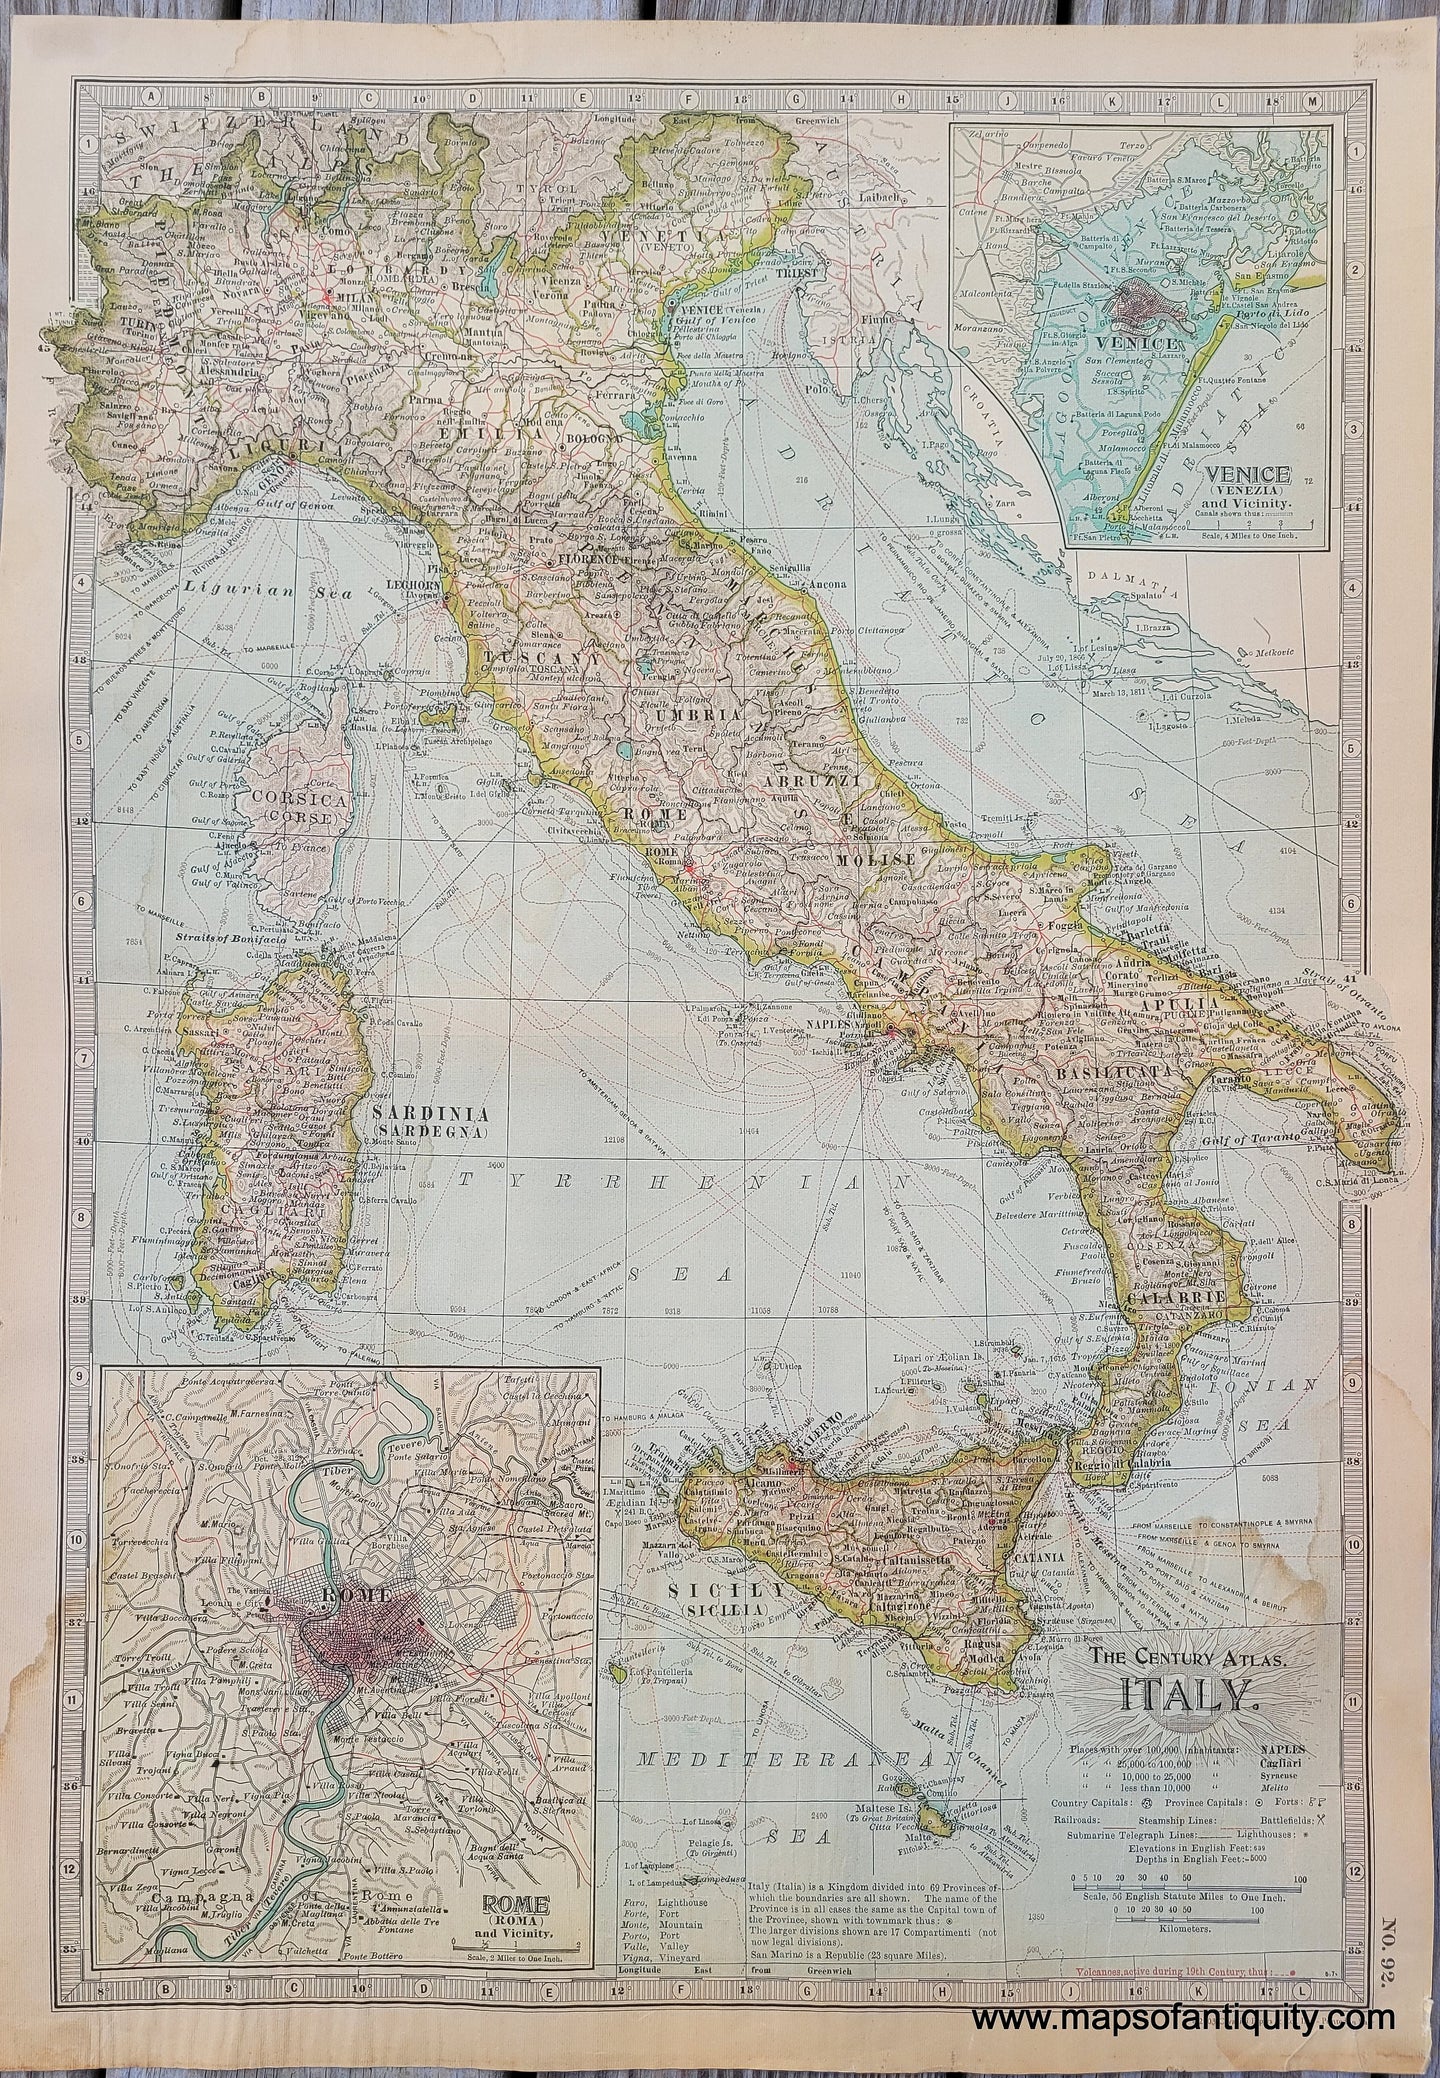 The Century Atlas Italy - Reproduction Map